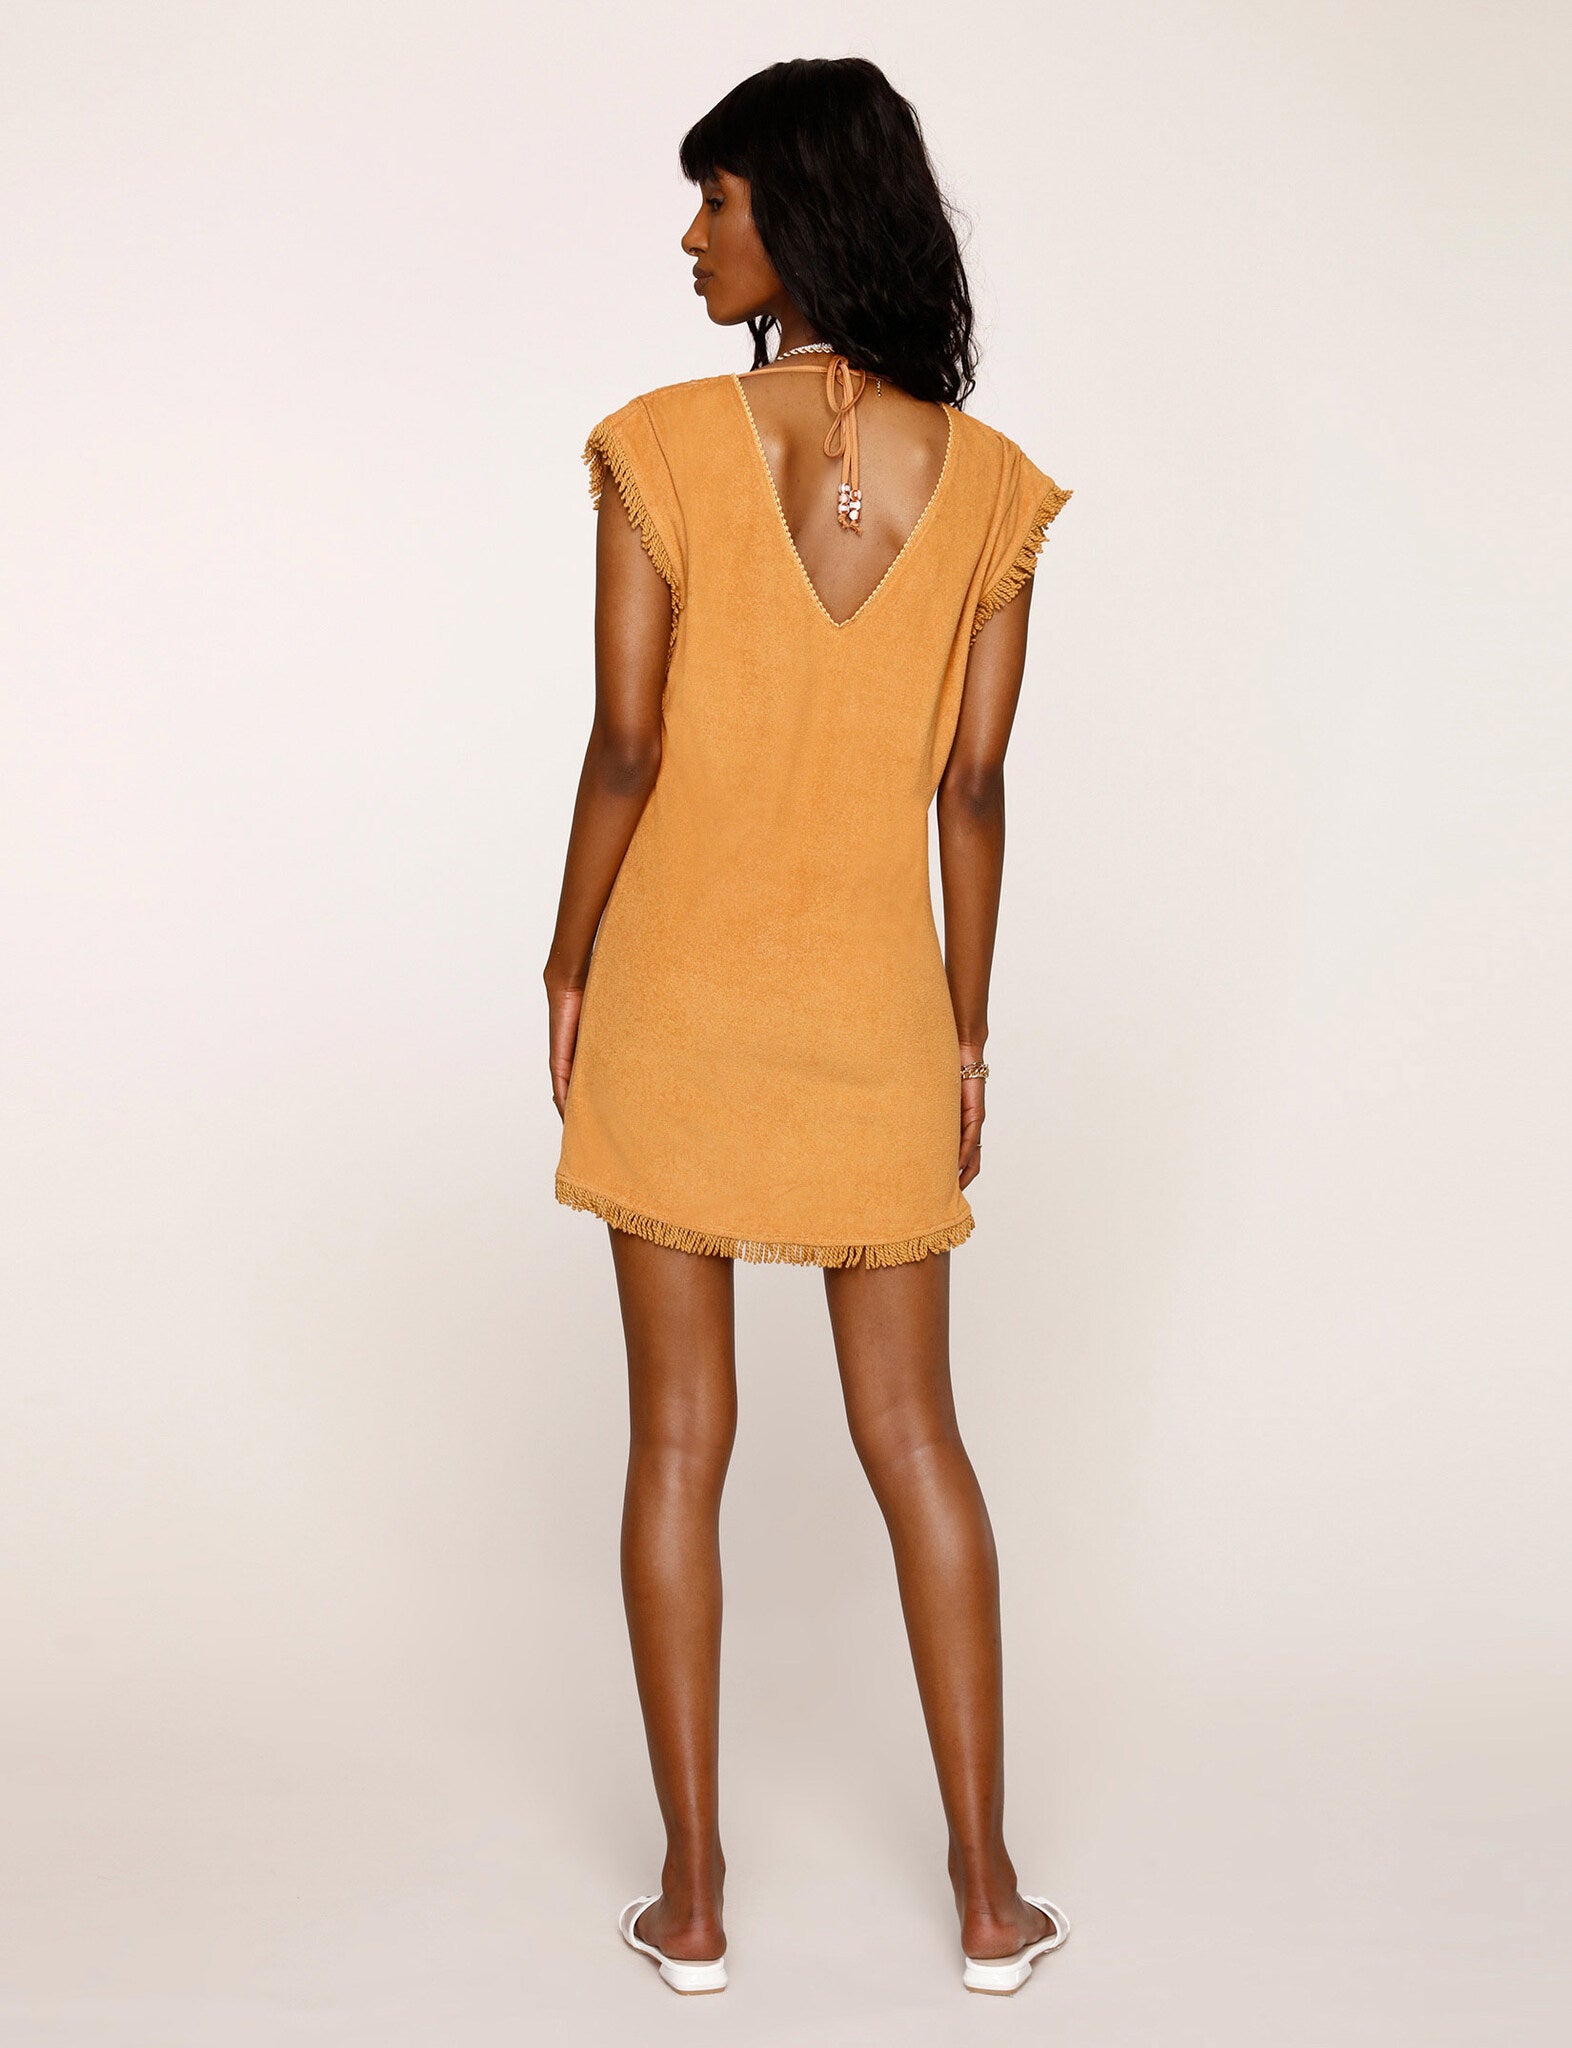 UNIKONCEPT Lifestyle Boutique and Lounge; Heartloom Heath Tunic in Golden pictured on a model